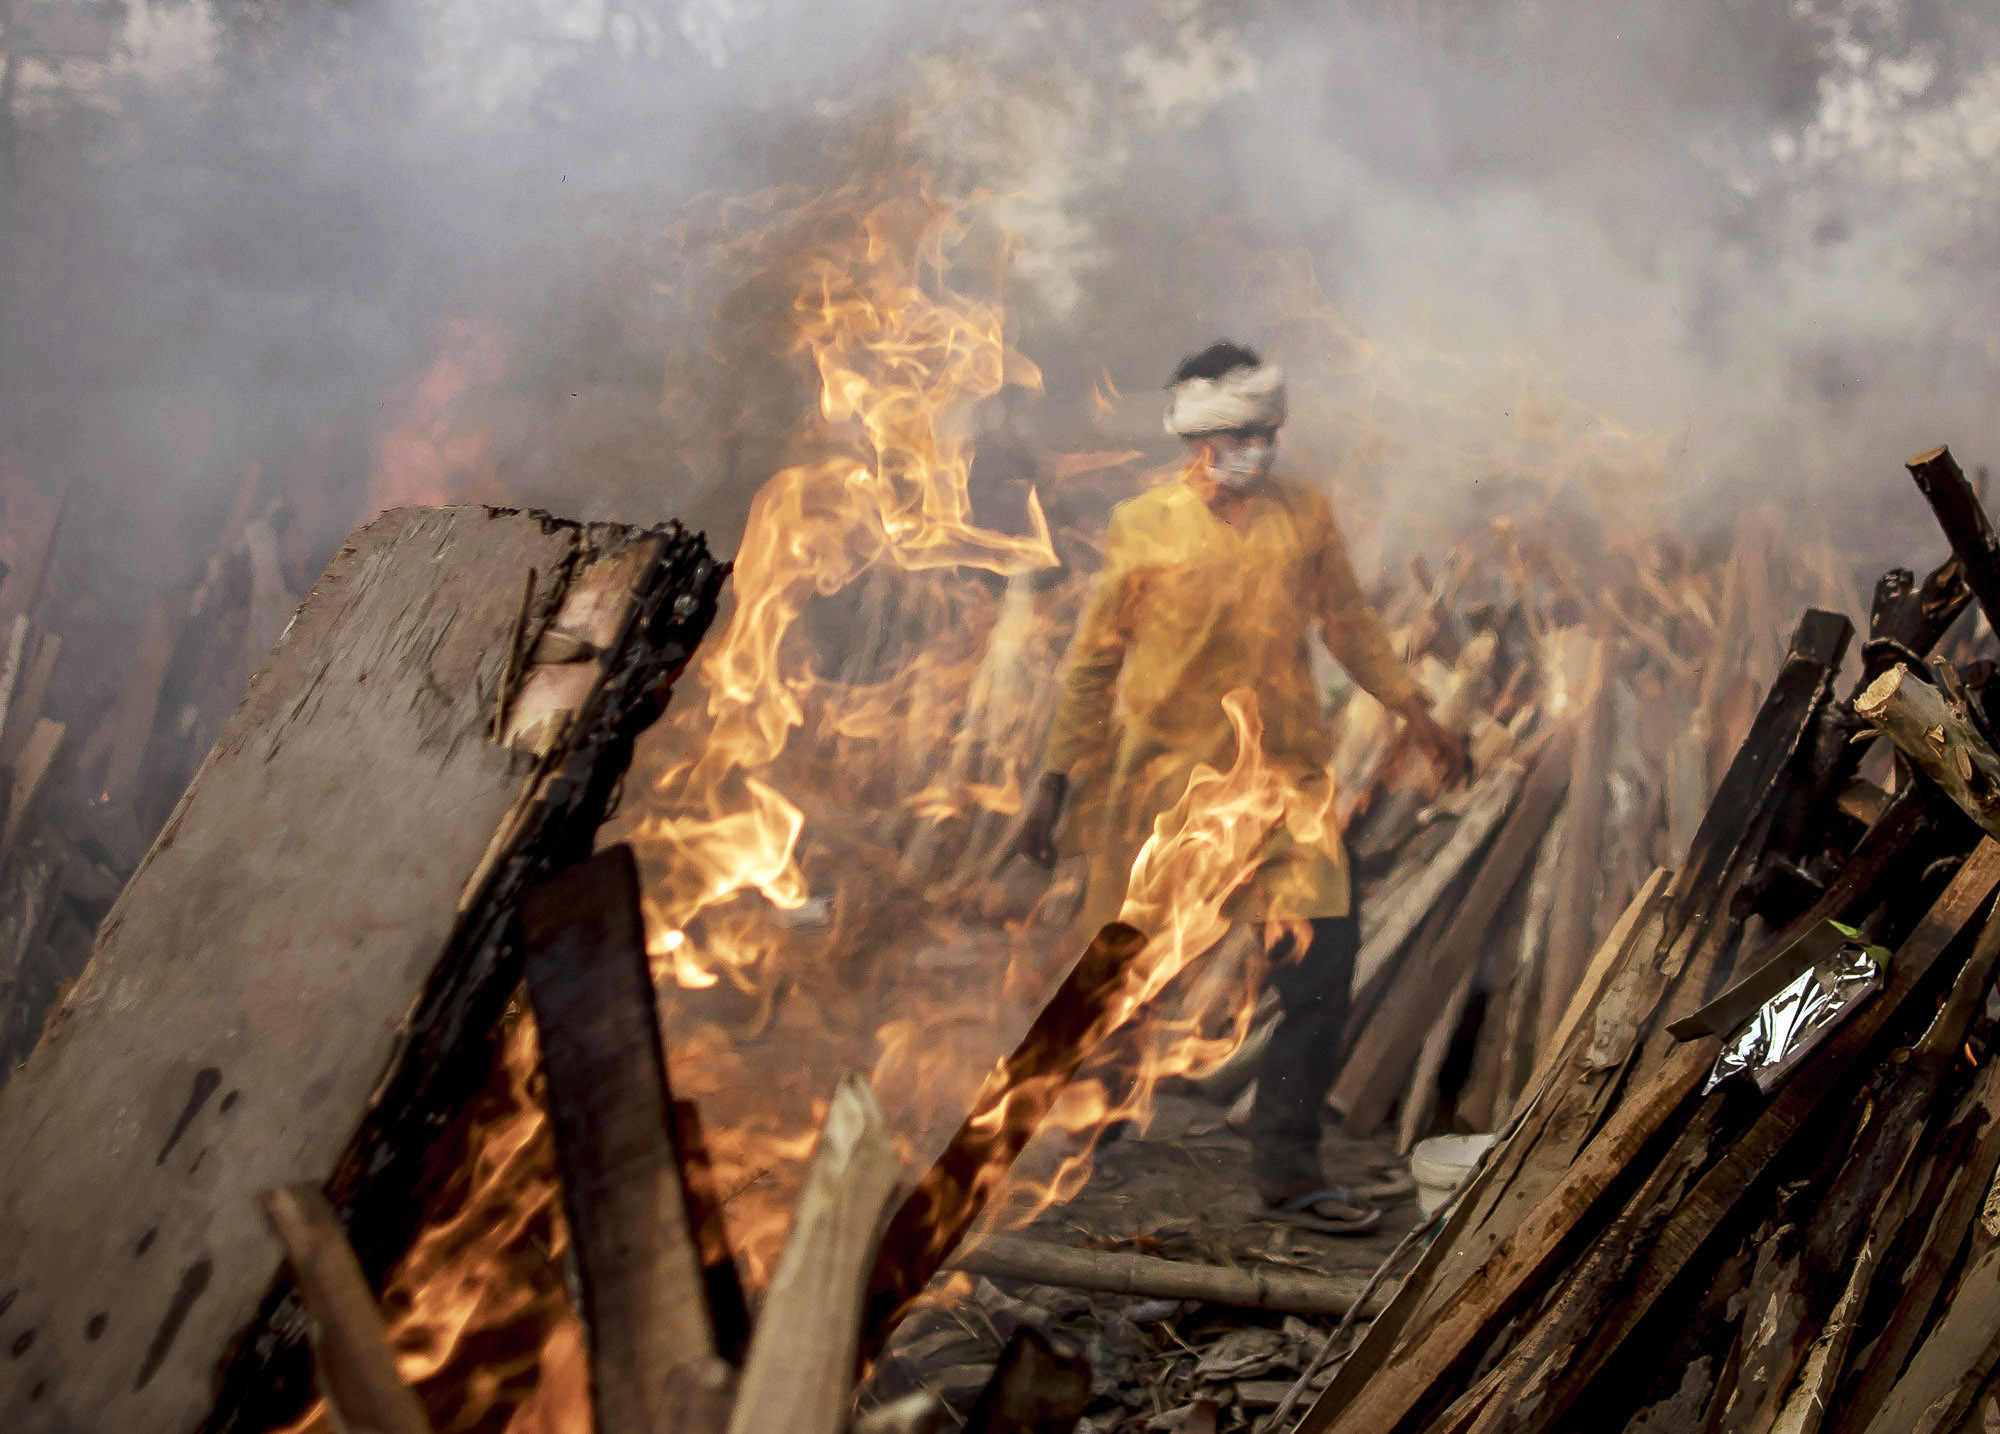 A priest walks near&nbsp;burning funeral pyres&nbsp;in New Delhi, India on May 1.